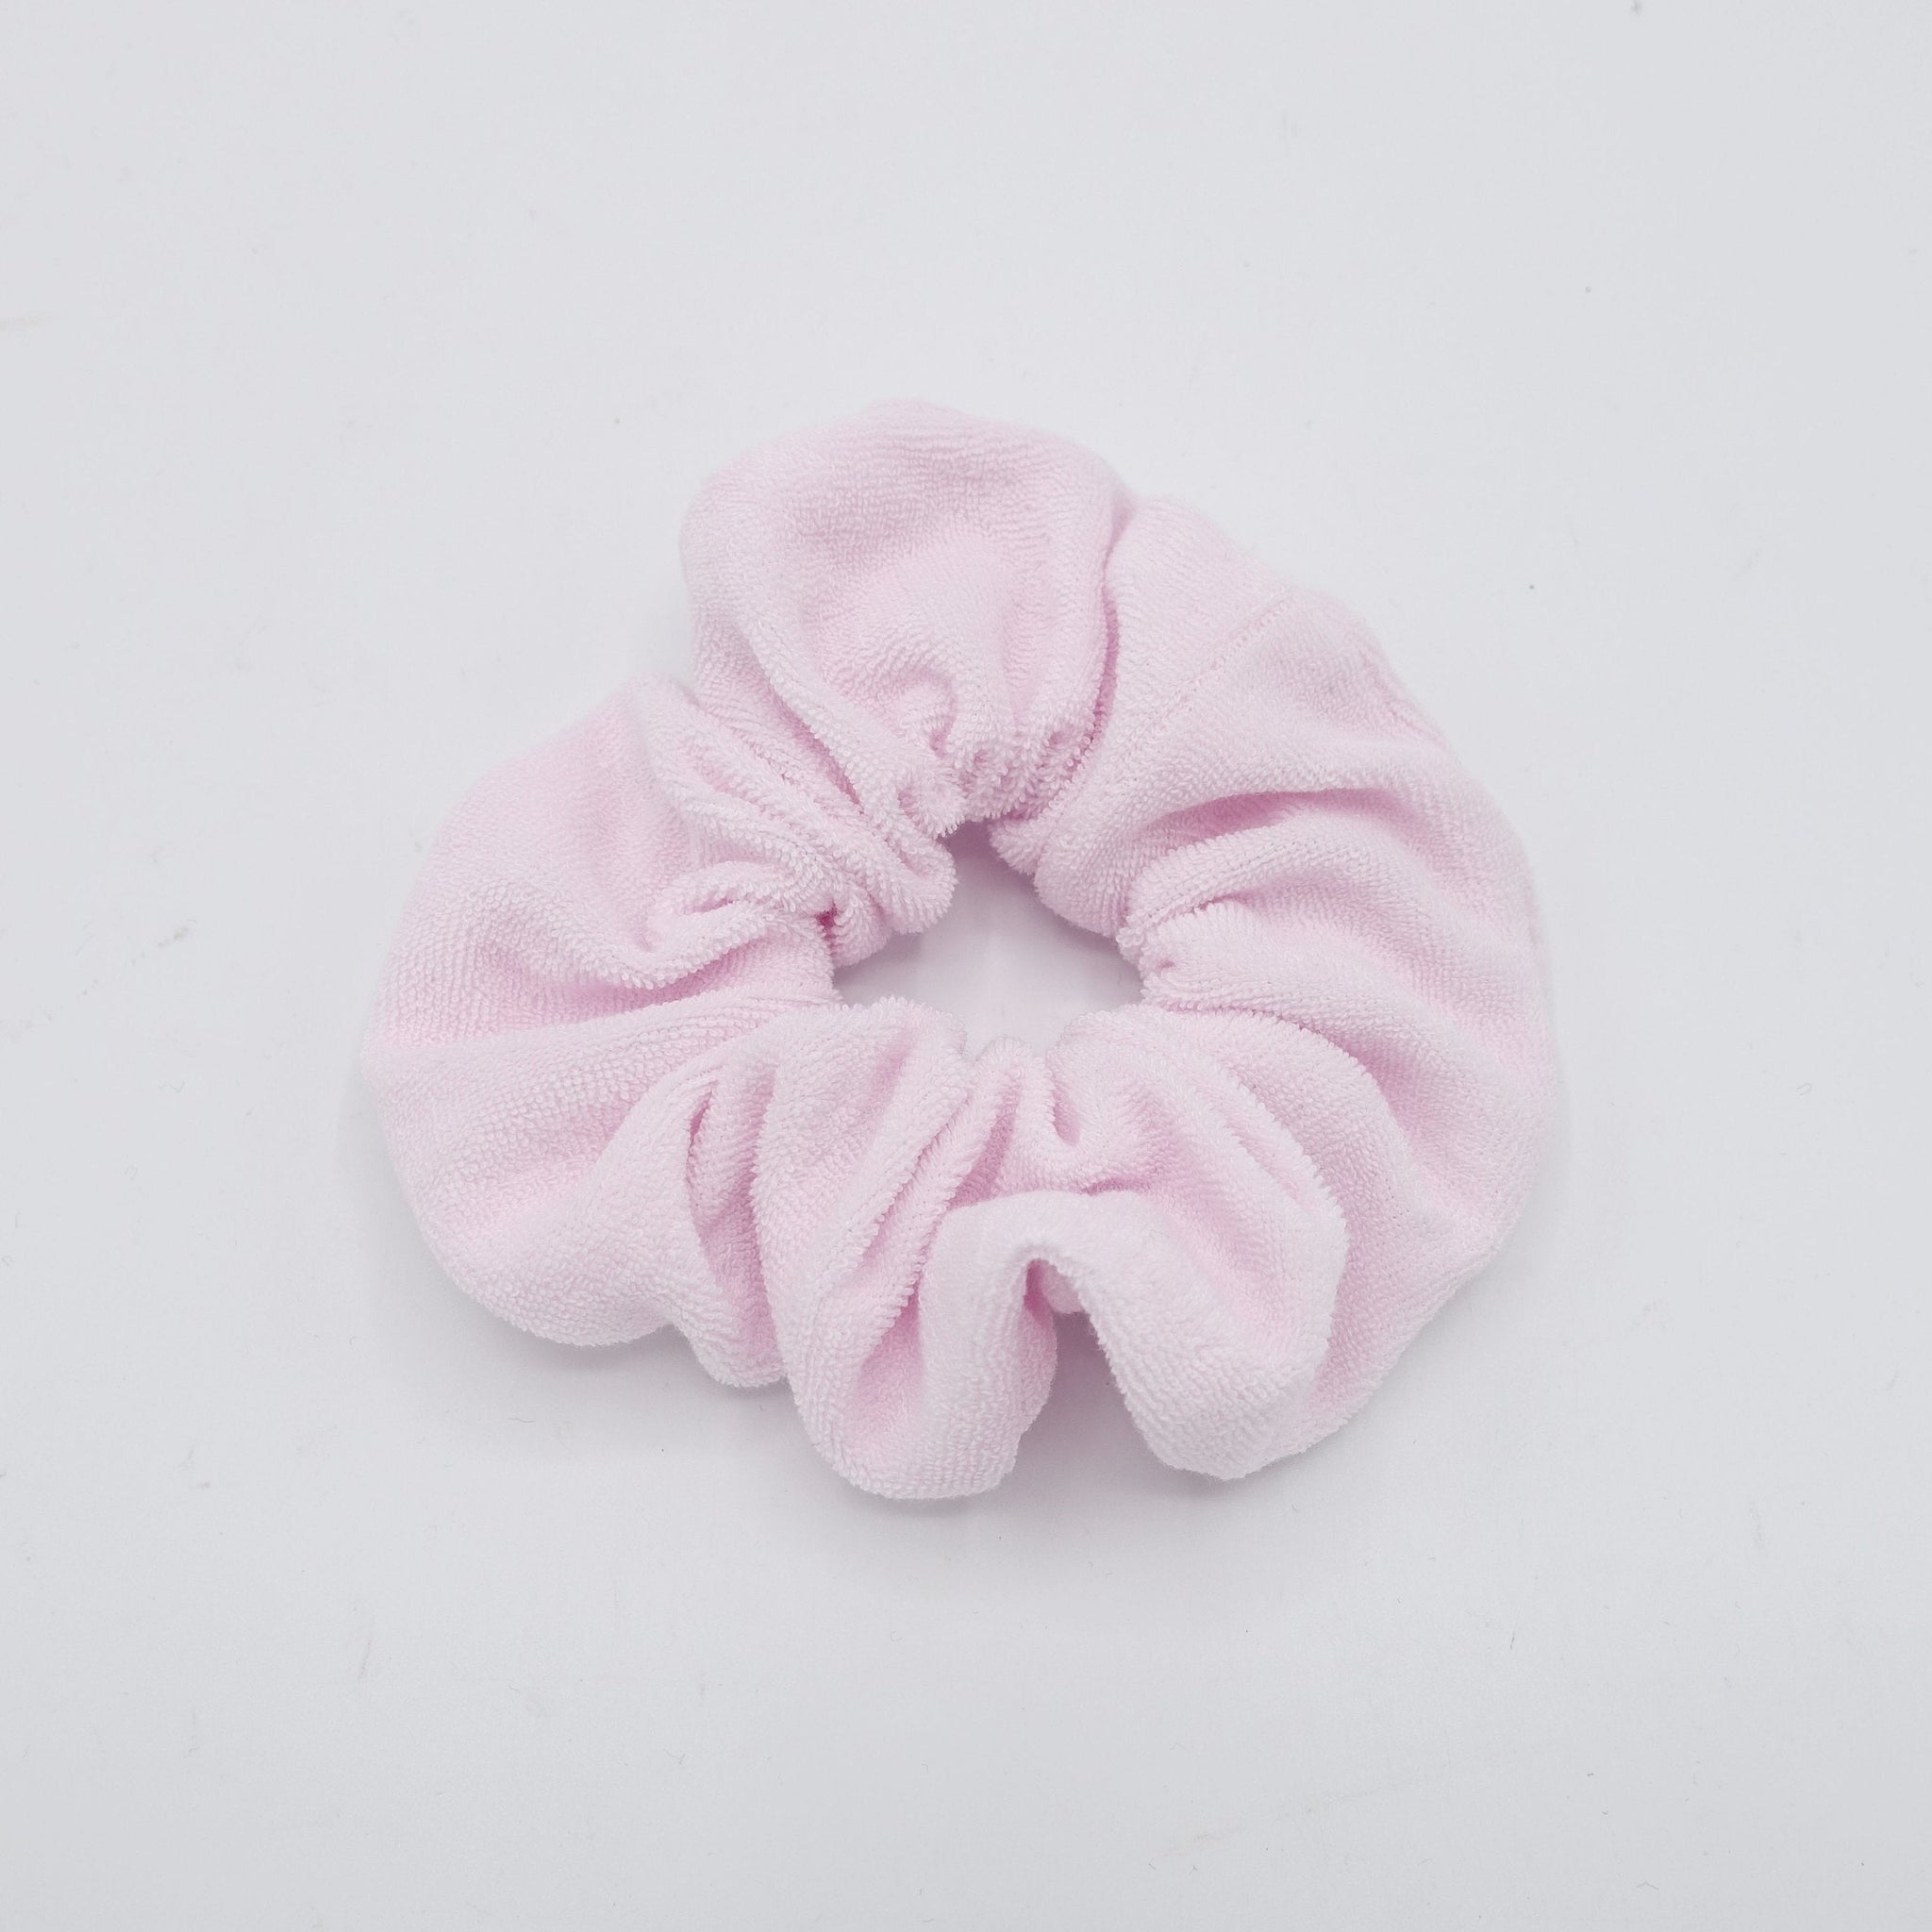 veryshine.com Scrunchies Baby pink terry cloth scrunchies solid cotton scrunchies hair elastic accessory for women